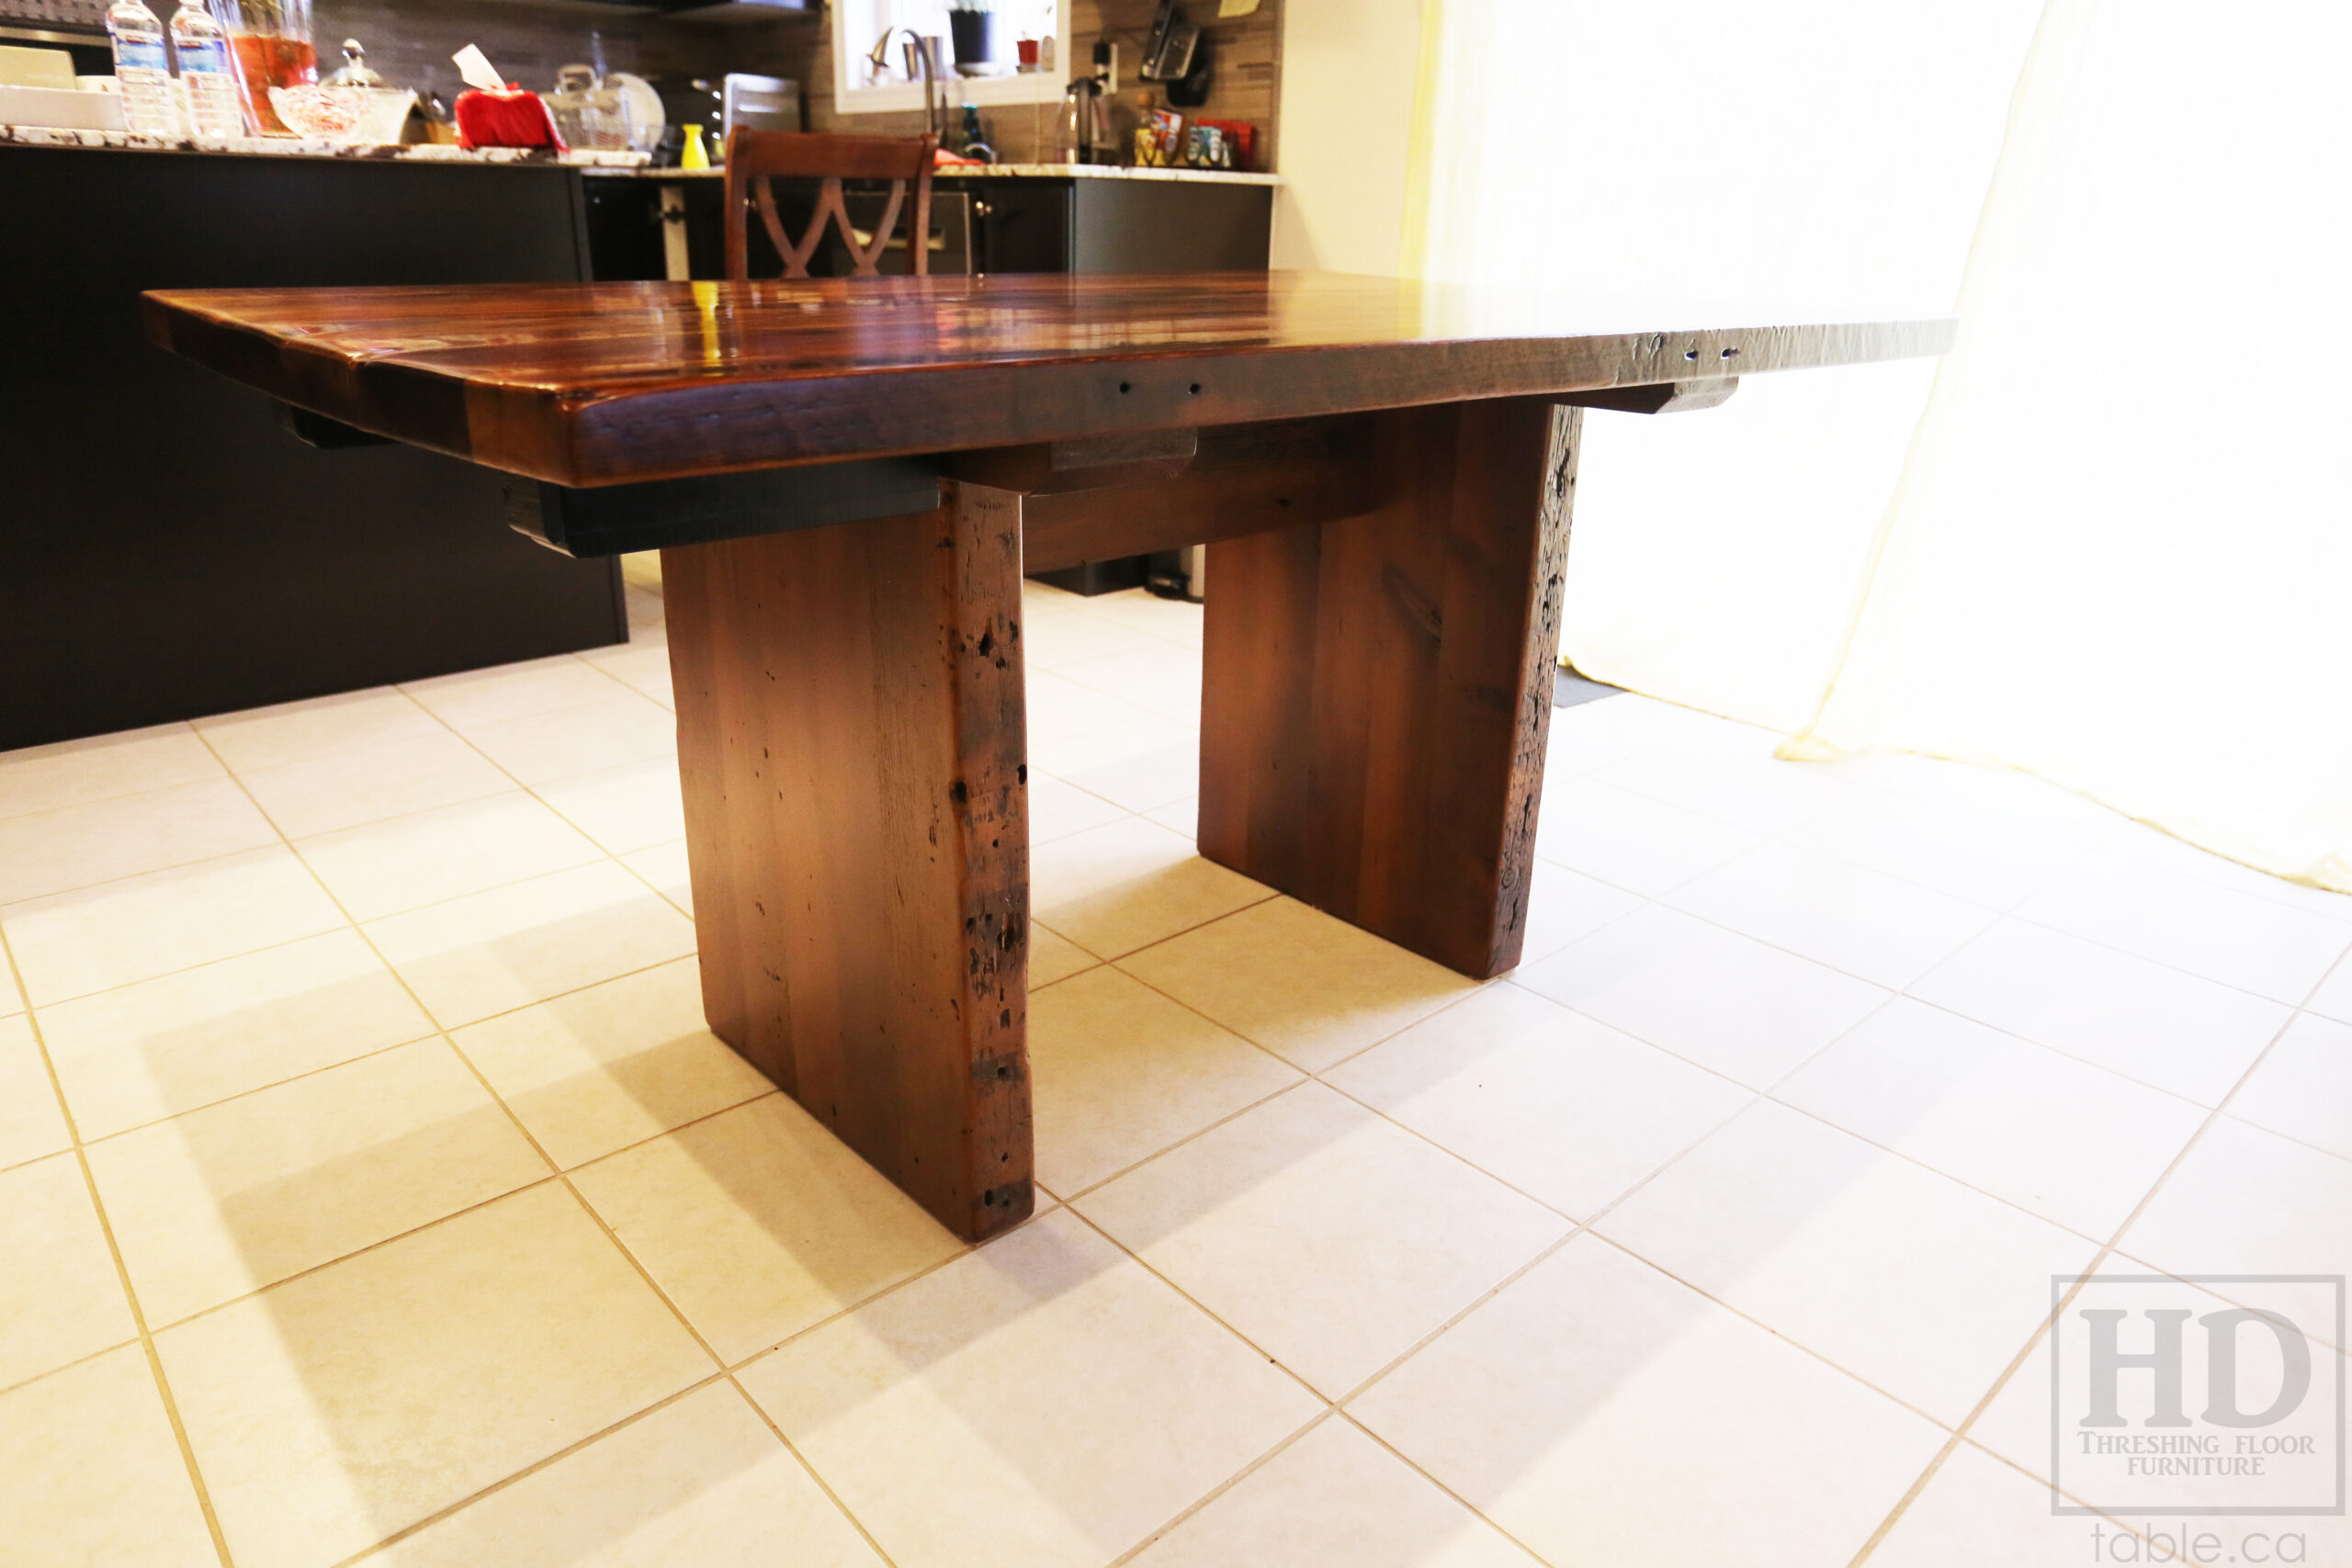 5' Reclaimed Ontario Barnwood Table we made for a Brampton Home - 38" wide - Plank Base Option - Old Growth Hemlock Threshing Floor Construction - Original edges & distressing maintained - Premium epoxy + satin polyurethane finish - No breadboard ends option - One 18" Leaf - www.table.ca